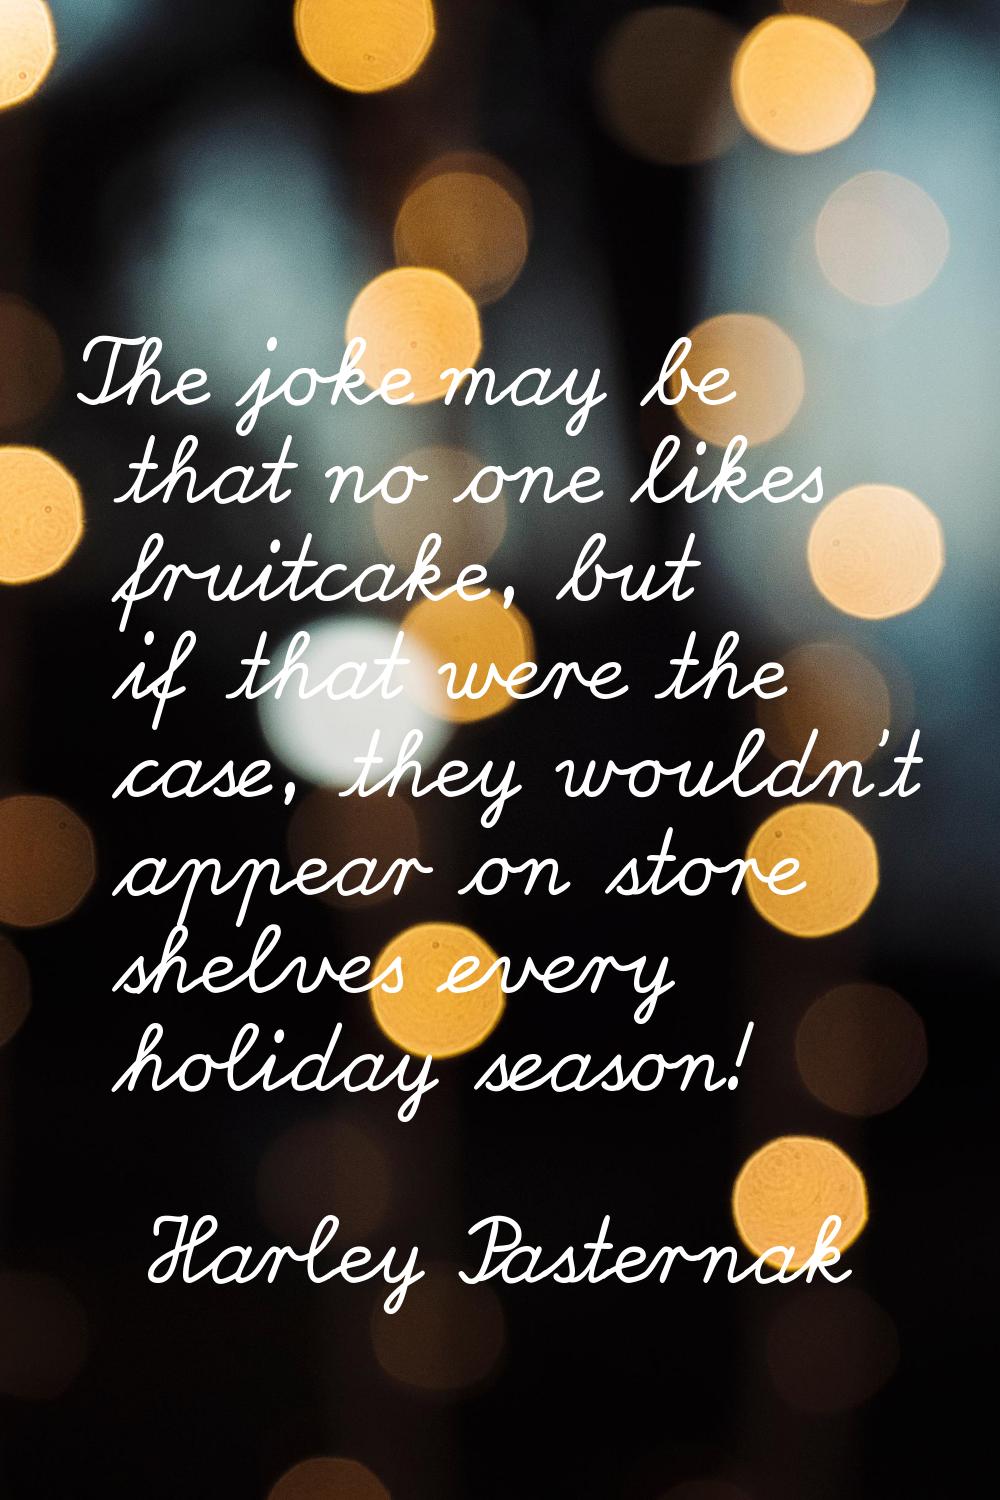 The joke may be that no one likes fruitcake, but if that were the case, they wouldn't appear on sto